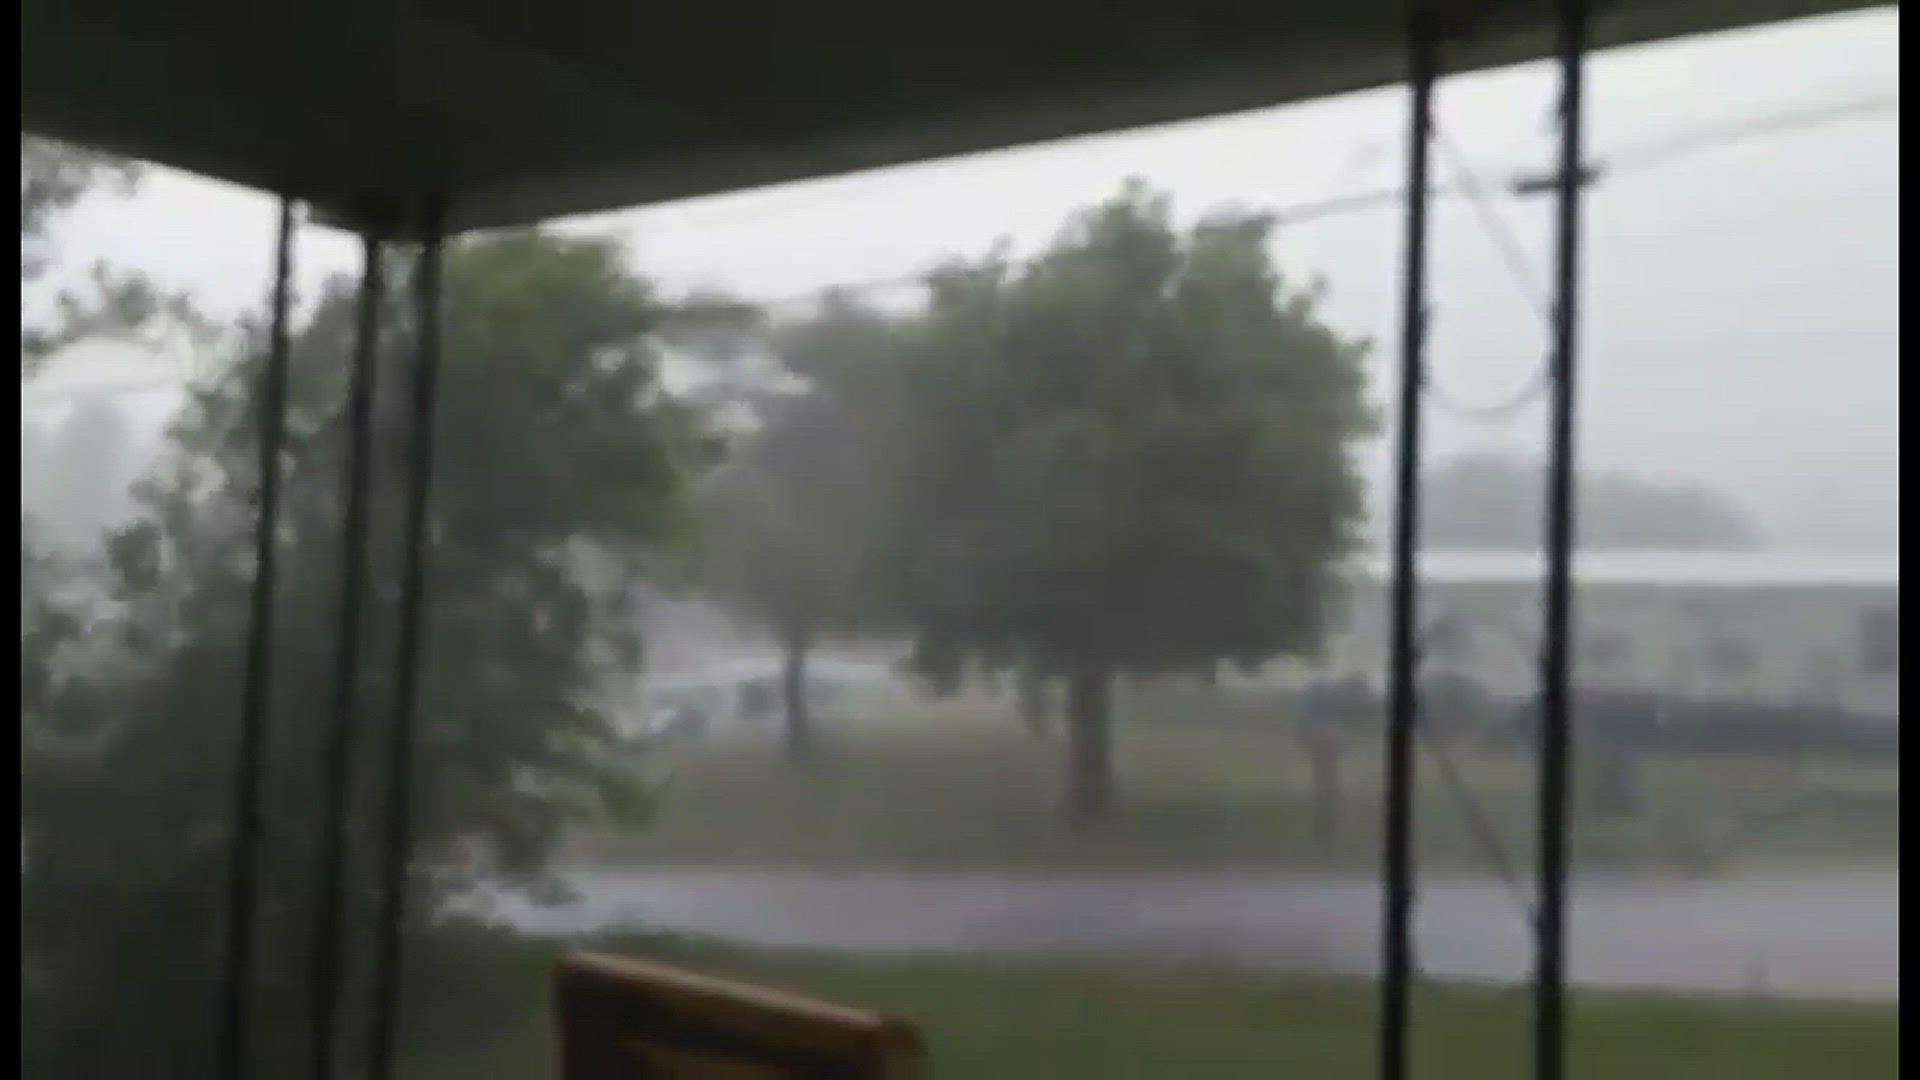 A storm moved through Loudon County on Tuesday night and knocked out power to many people in the area. Video courtesy Albert Legue. (6/14/16)